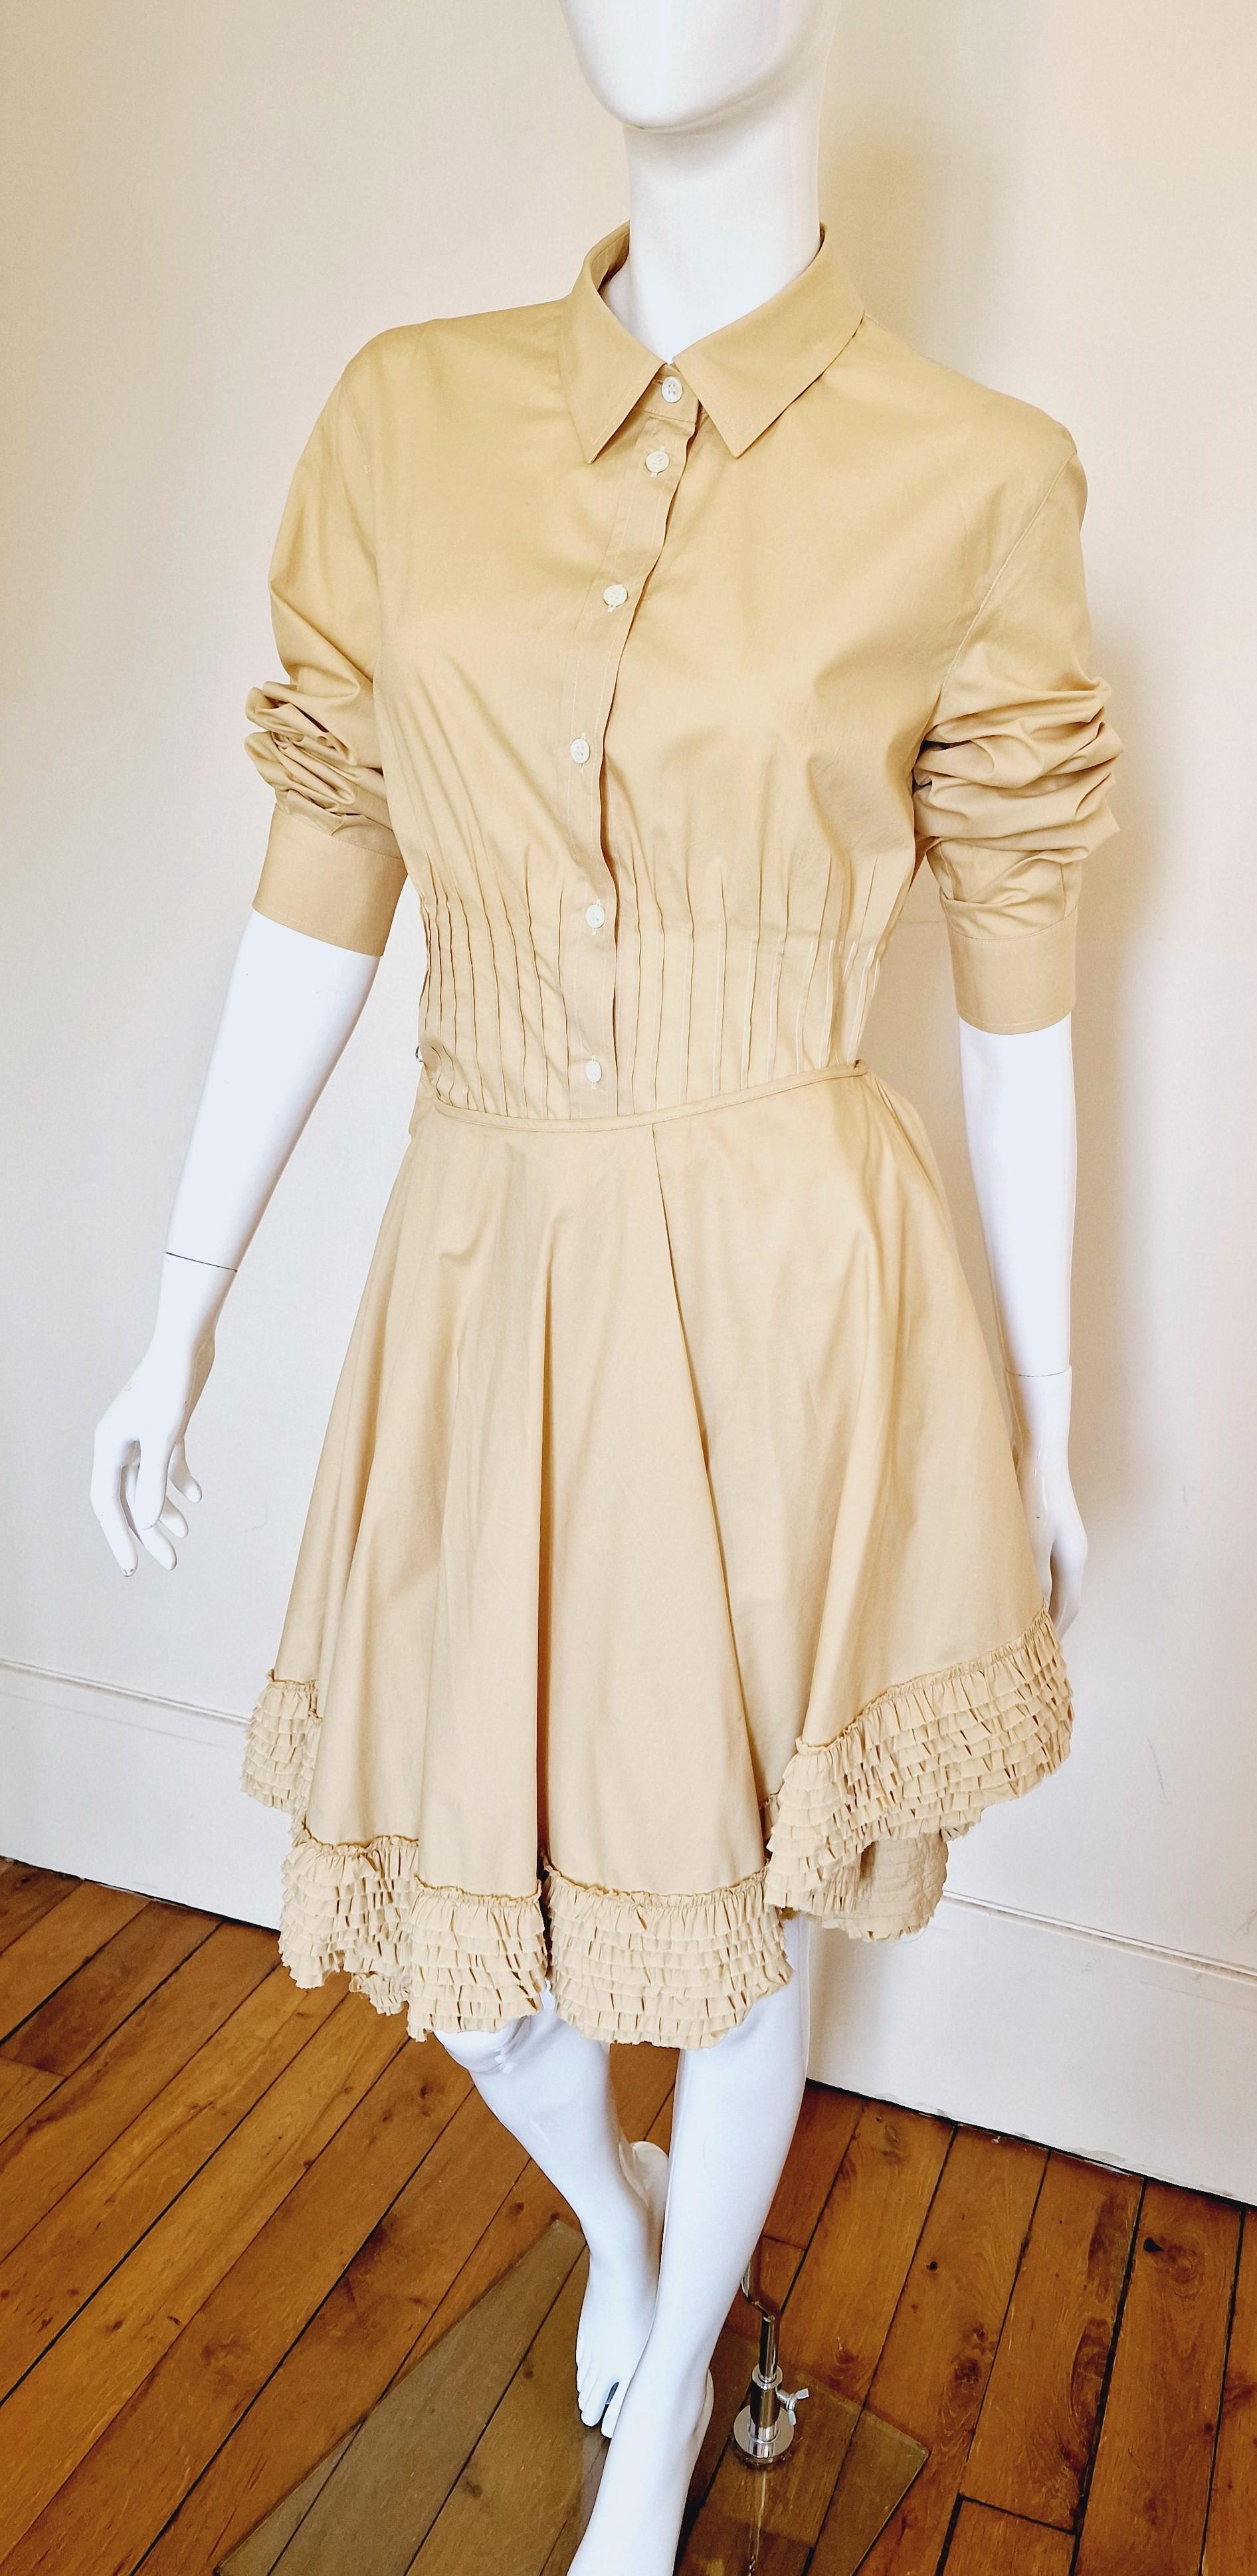 Beige Early Alexander McQueen Runway #20 The Dance of the Twisted Bull 2002 Dress For Sale